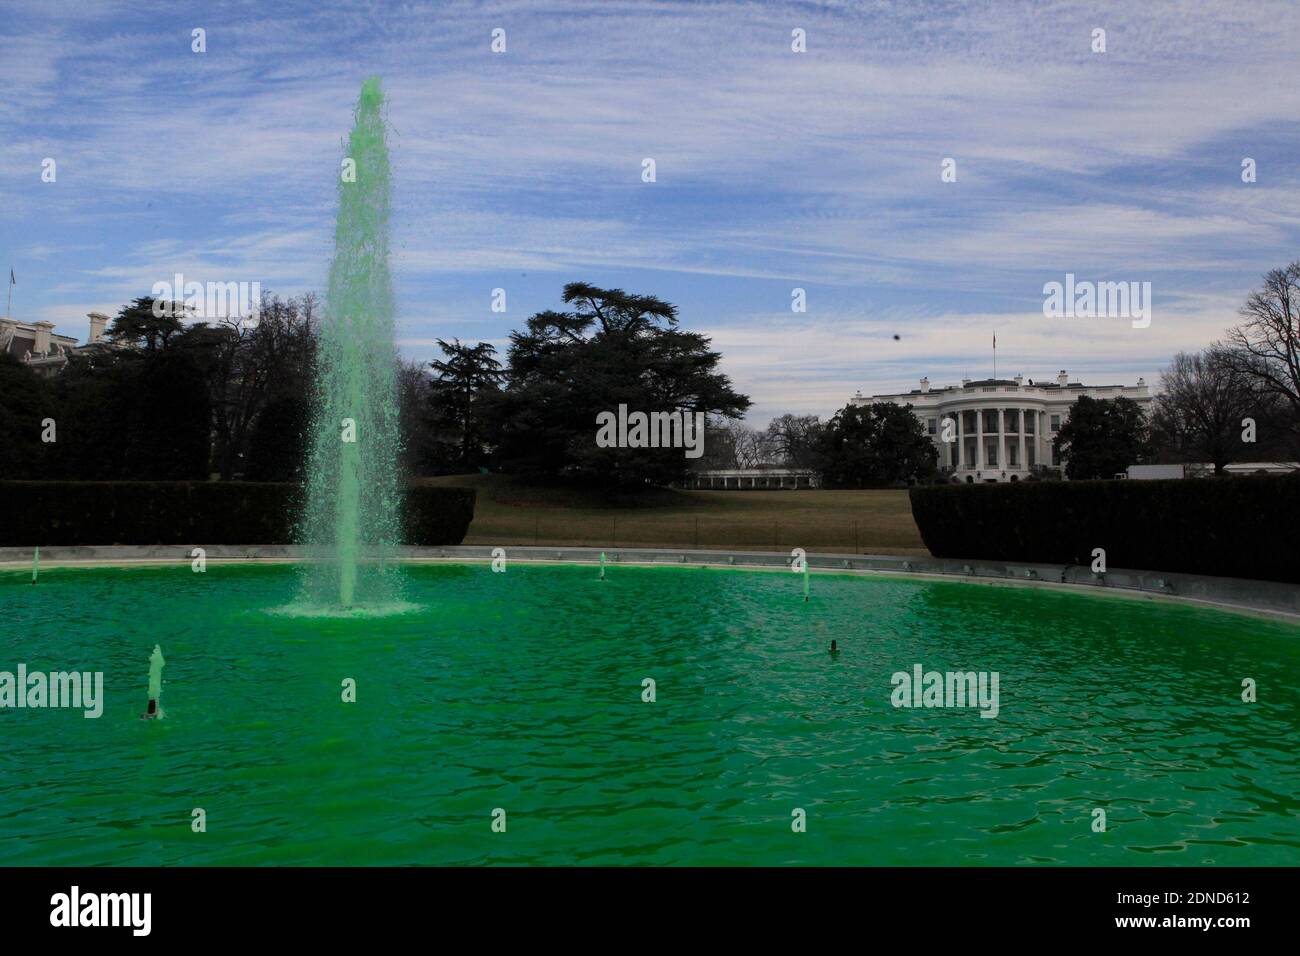 For St. Patrick's Day a green dye was added to the water of the fountain on the South Lawn of the White House in Washington, DC, USA, on March 17, 2015. Photo by Dennis Brack/Pool/ABACAPRESS.COM Stock Photo